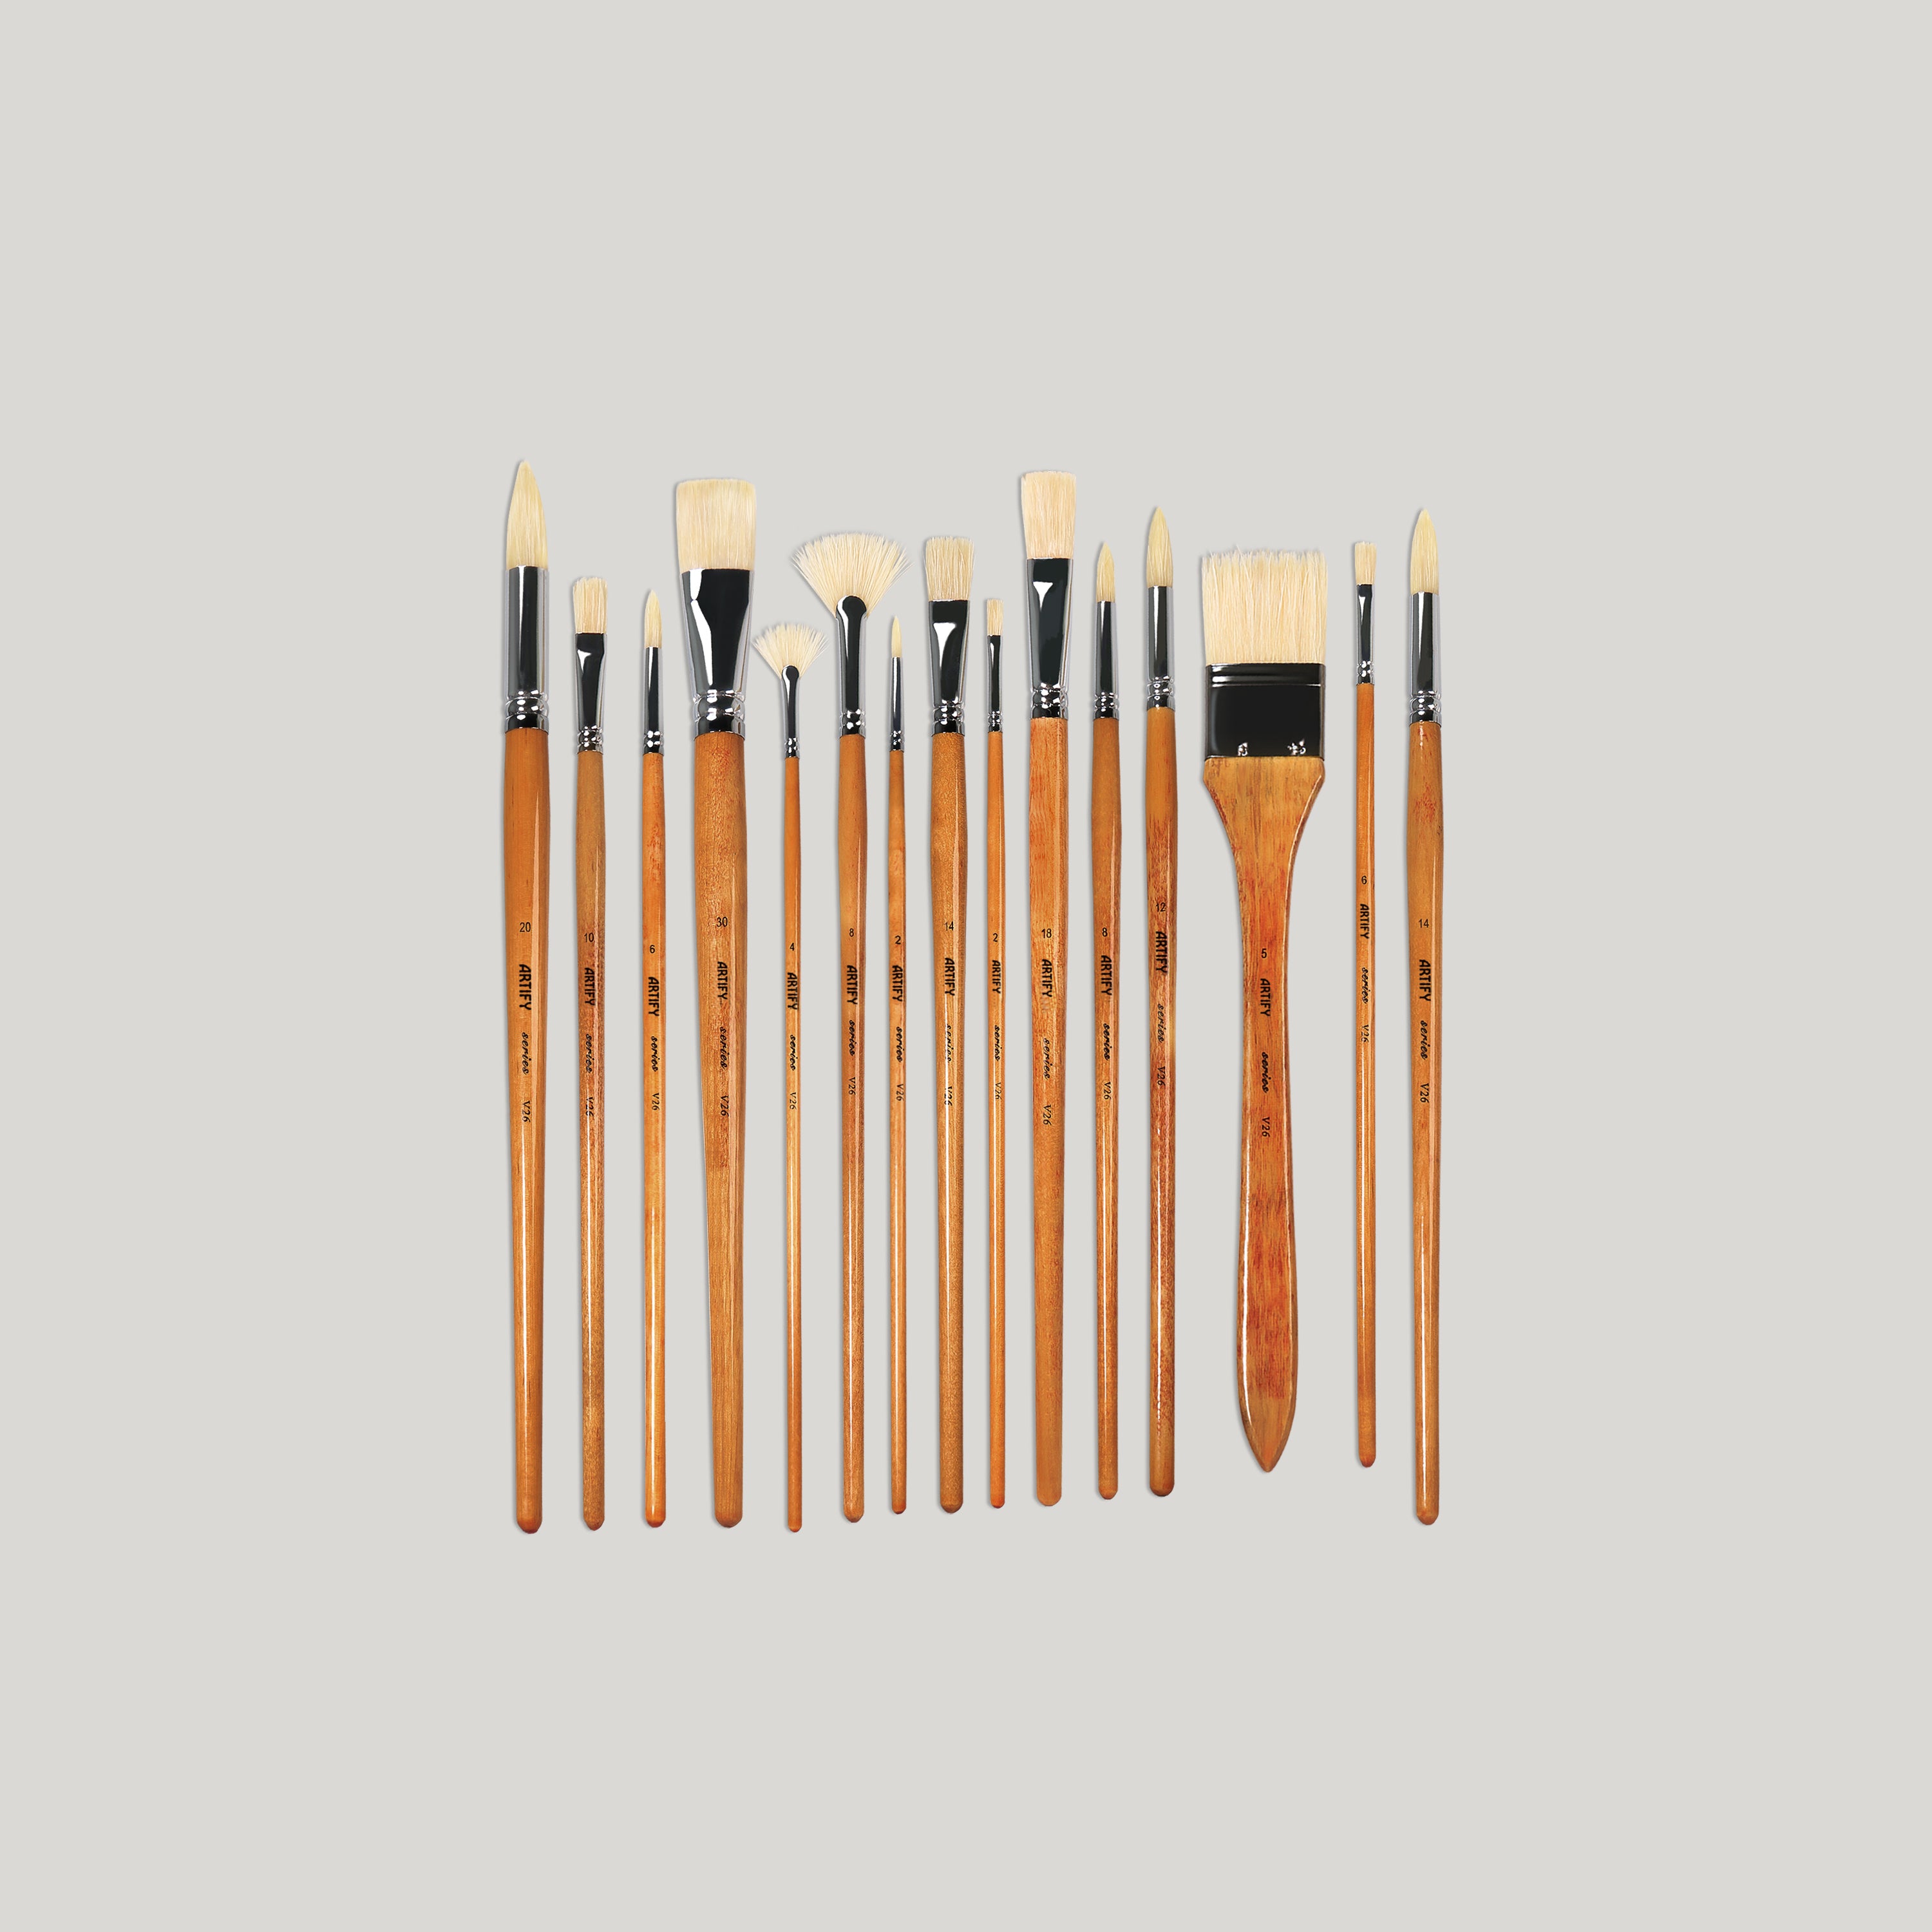 Artify 15 pcs Professional Paint Brush Set Perfect for Oil Painting w